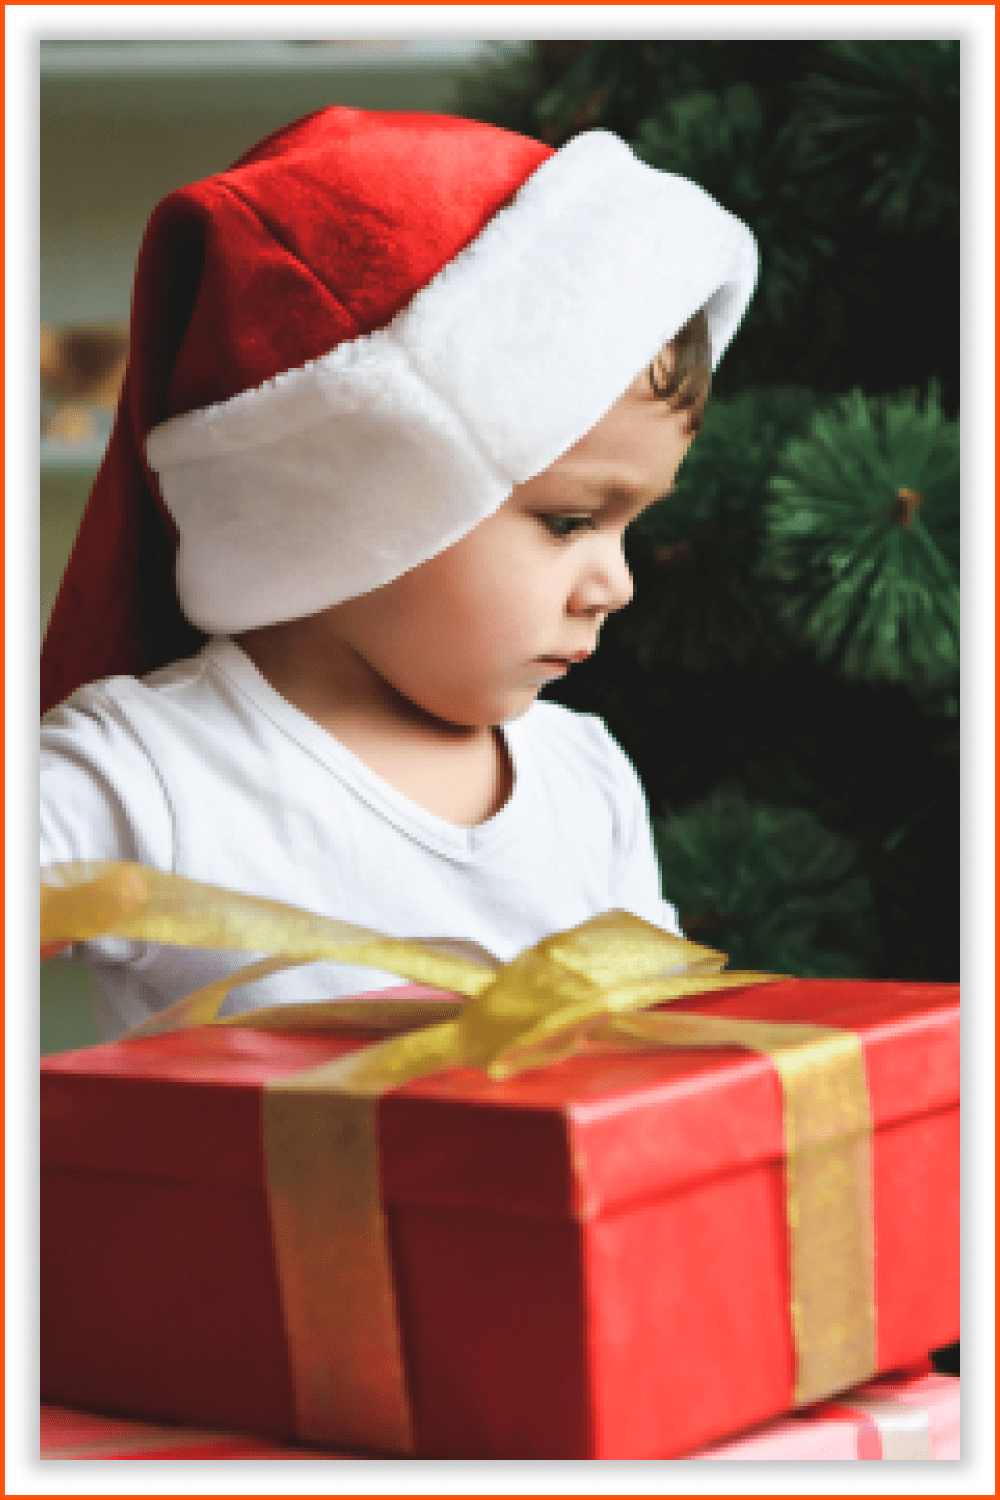 A small boy in a Santa hat with a big red gift and a green tree in the background.